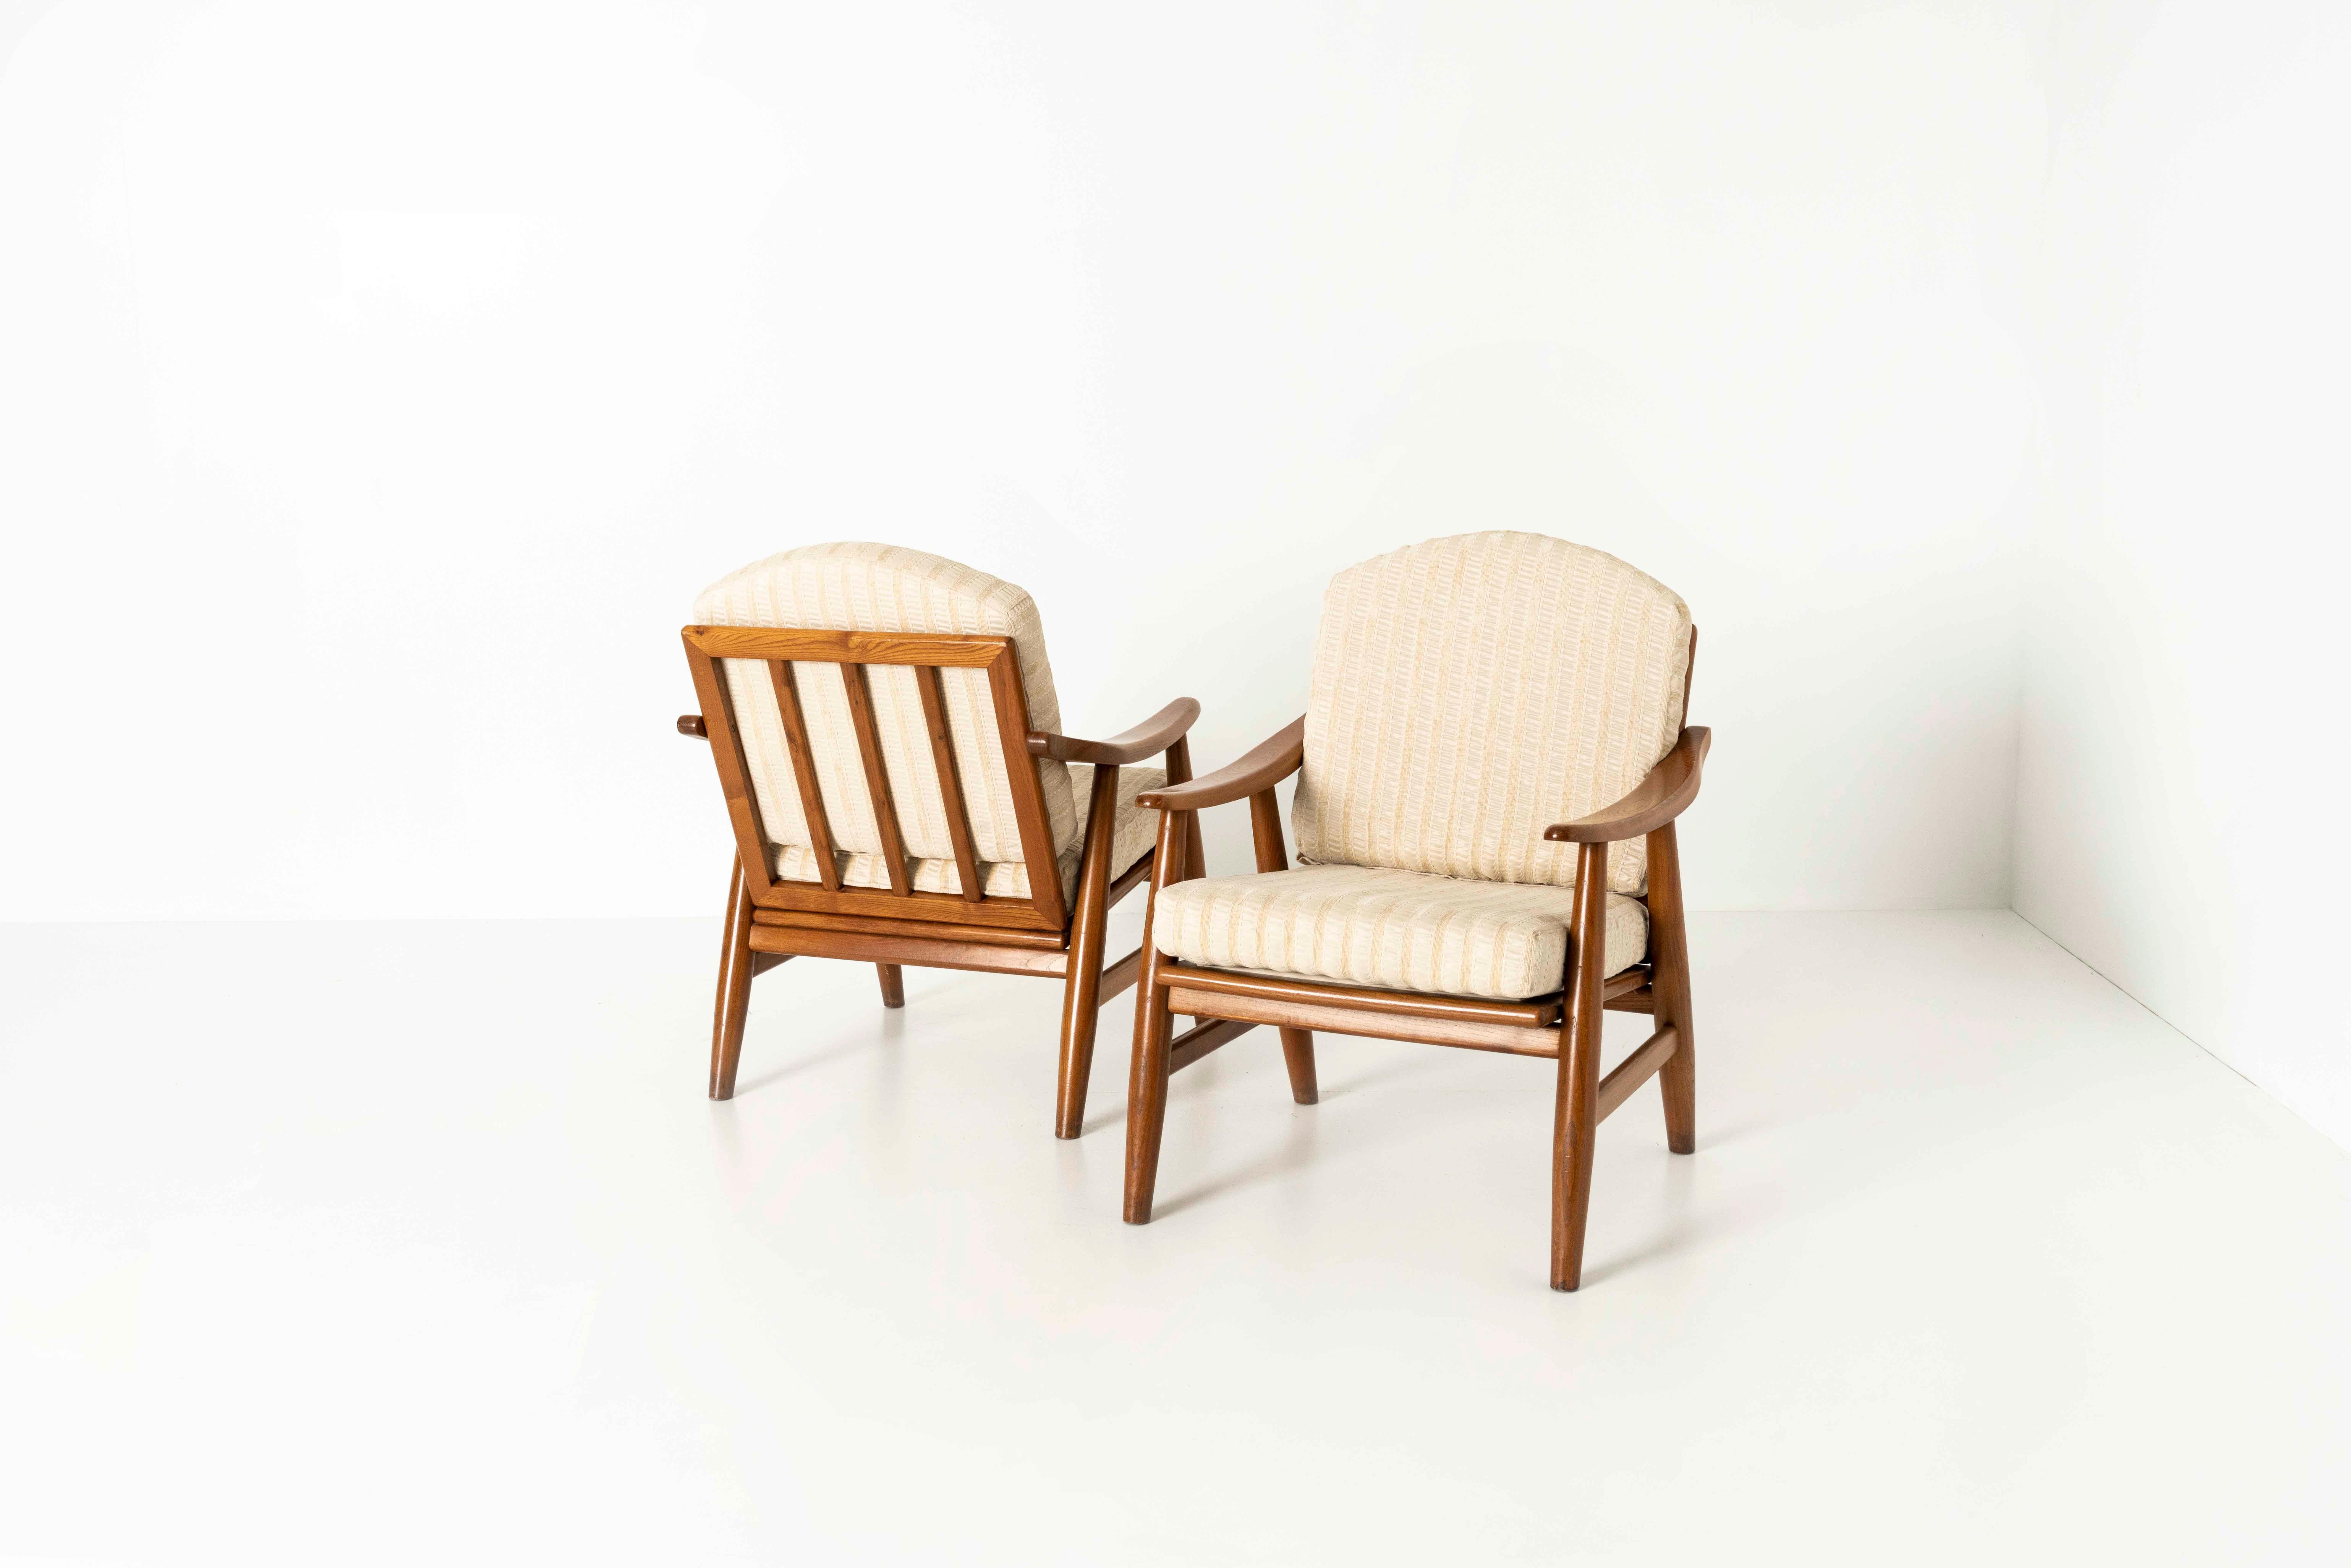 Set of Four Italian Vintage Lounge Chairs from the 1970s. These chairs have a simple, yet elegant design and two cushions in off-white shiny fabric. The legs are cone-shaped and the backrest is bent backward, making the chairs comfortable. Upon